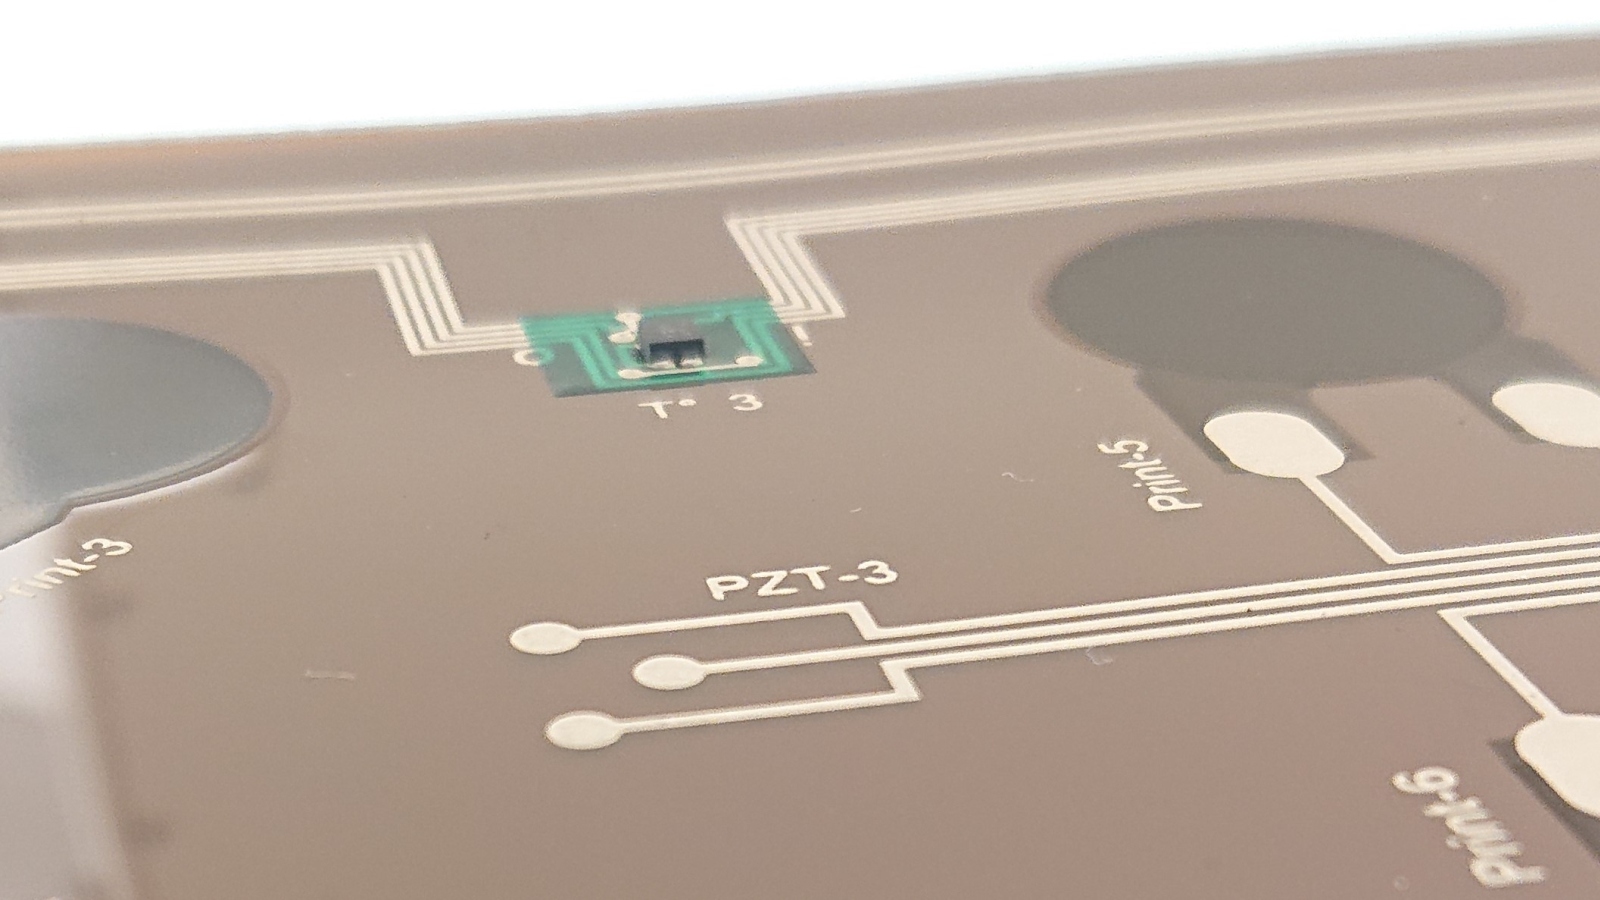 Details of the printed circuit board for the battery sensor system with mounted temperature sensor and printed ultrasonic sensors.